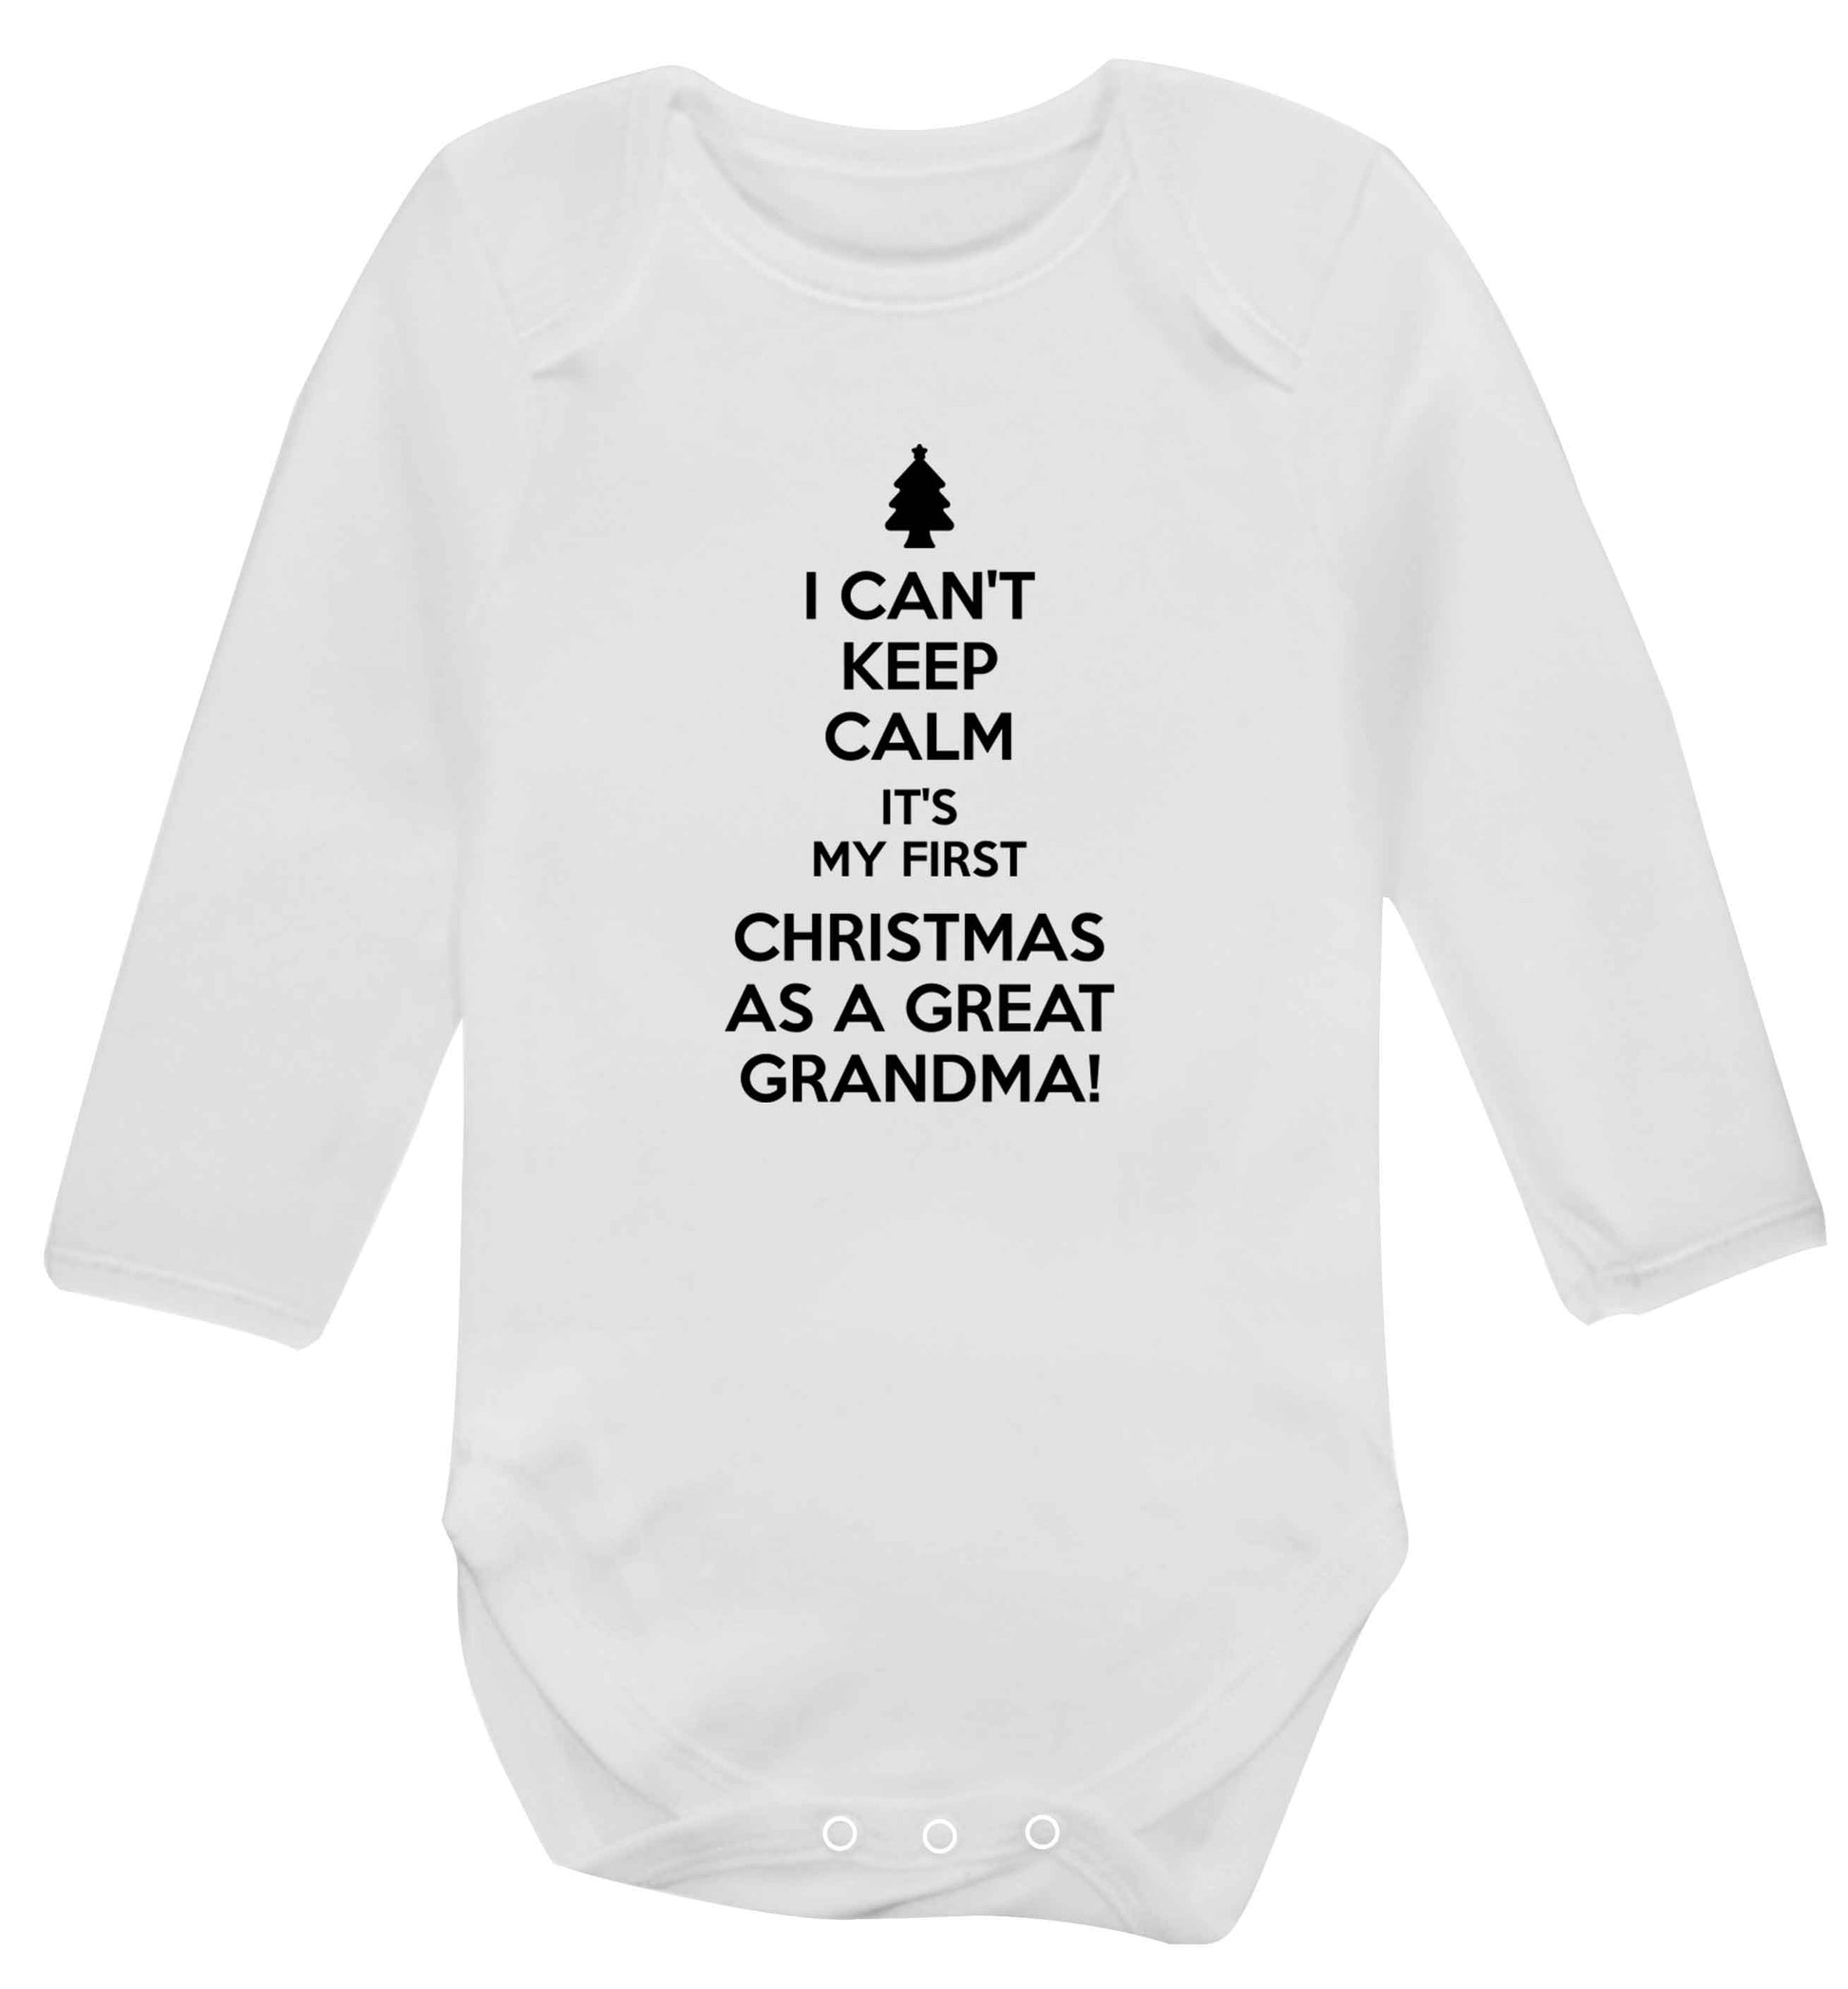 I can't keep calm it's my first Christmas as a great grandma! Baby Vest long sleeved white 6-12 months